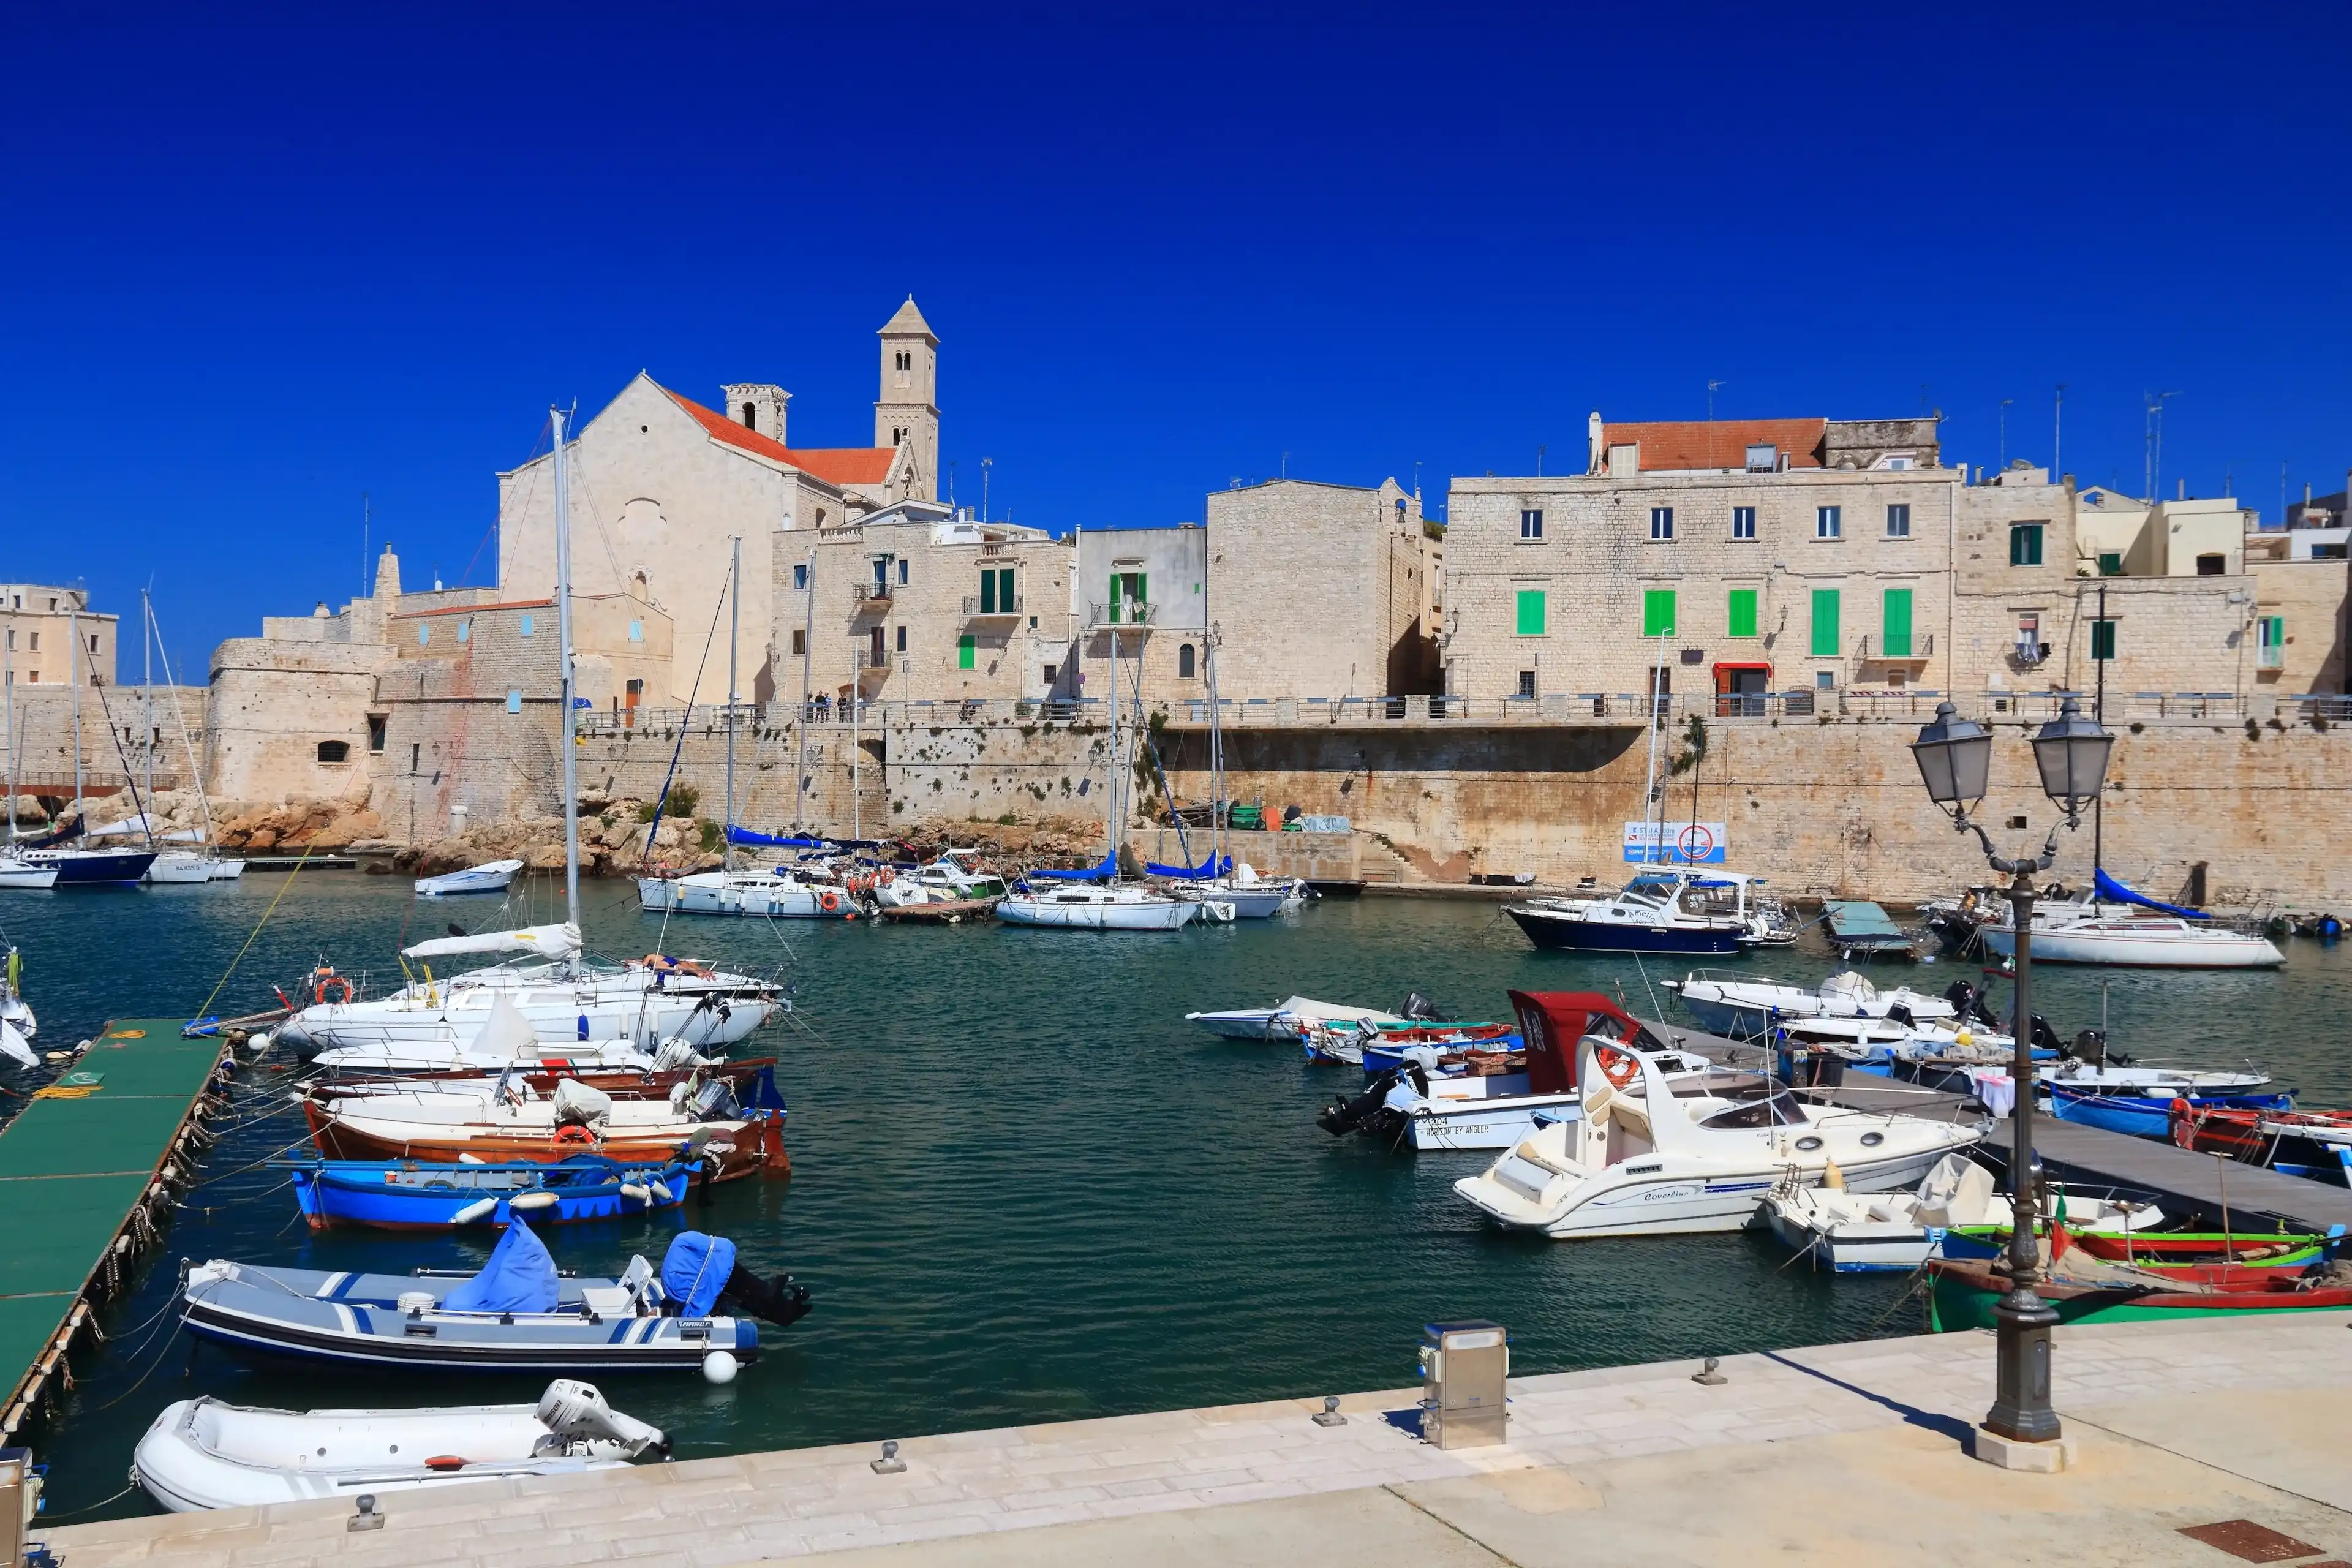 Best Giovinazzo hotels. Cheap hotels in Giovinazzo, Italy